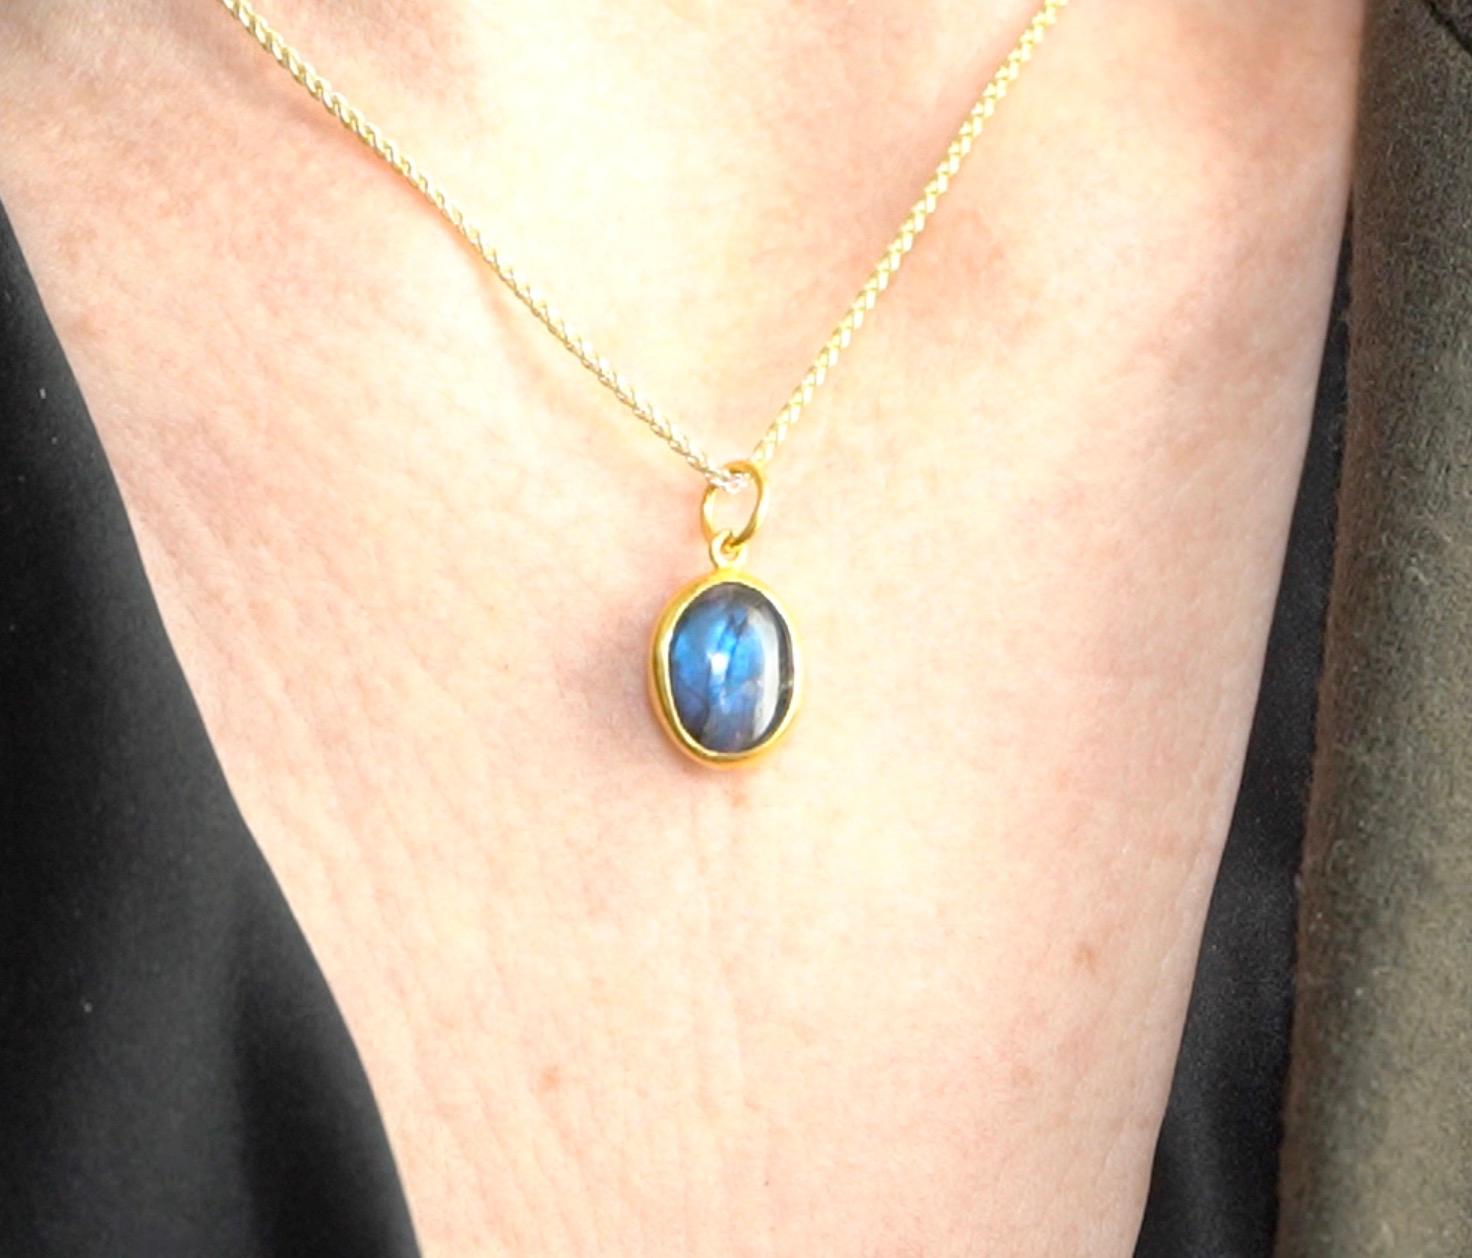 Smooth, Oval 5.45 Ct Labradorite Charm Pendant Necklace, 24kt Solid Gold In New Condition For Sale In Bozeman, MT